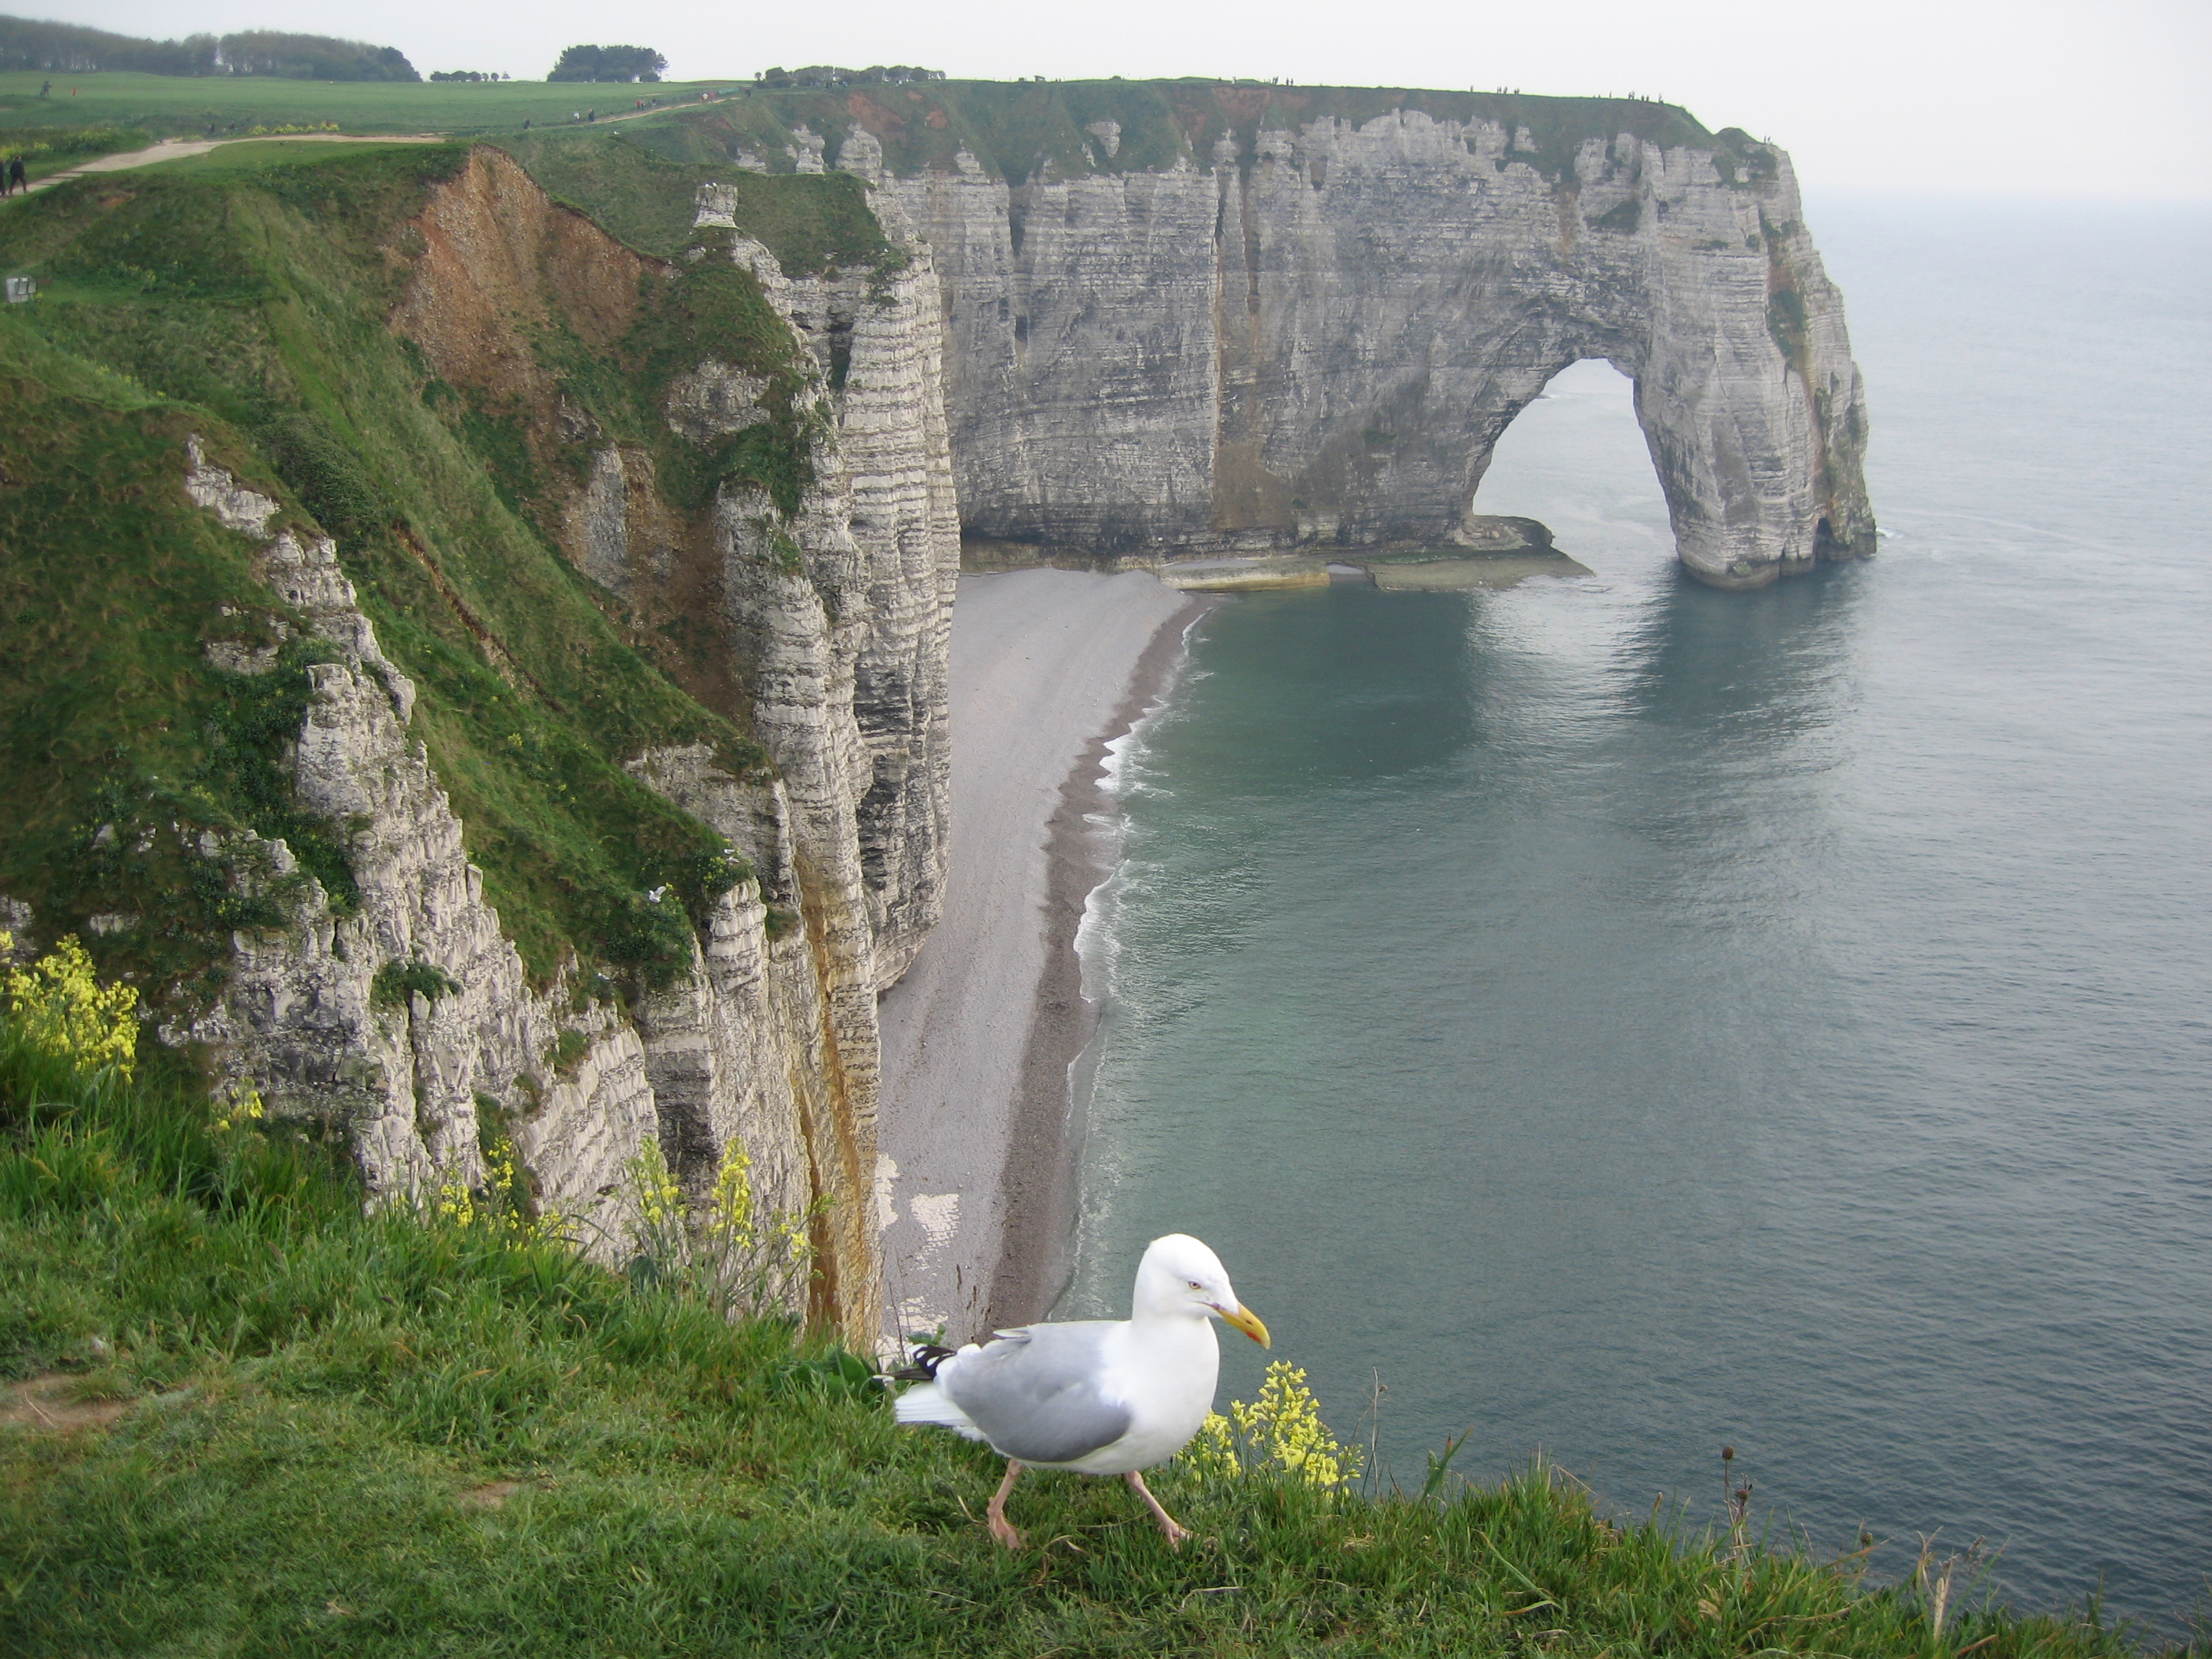 File:Cliffs of Etretat, Normandy, May 2006.jpg - Wikimedia Commons